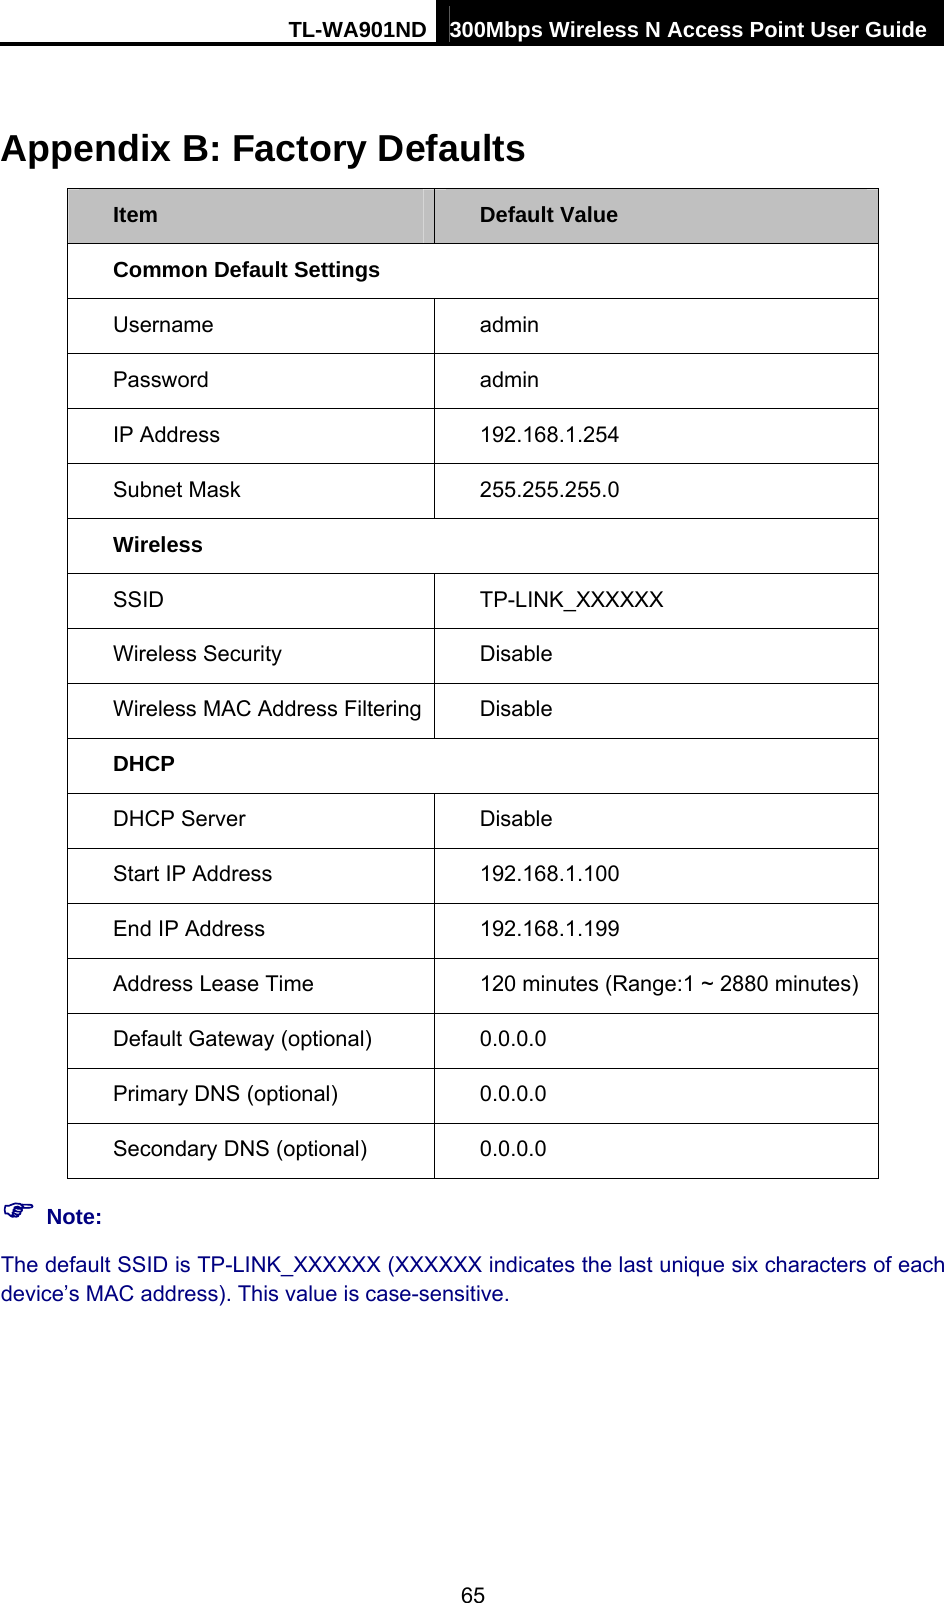 TL-WA901ND 300Mbps Wireless N Access Point User Guide Appendix B: Factory Defaults Item  Default Value Common Default Settings Username   admin Password  admin IP Address  192.168.1.254 Subnet Mask    255.255.255.0 Wireless SSID  TP-LINK_XXXXXX Wireless Security  Disable Wireless MAC Address Filtering  Disable DHCP DHCP Server  Disable Start IP Address  192.168.1.100 End IP Address  192.168.1.199 Address Lease Time  120 minutes (Range:1 ~ 2880 minutes) Default Gateway (optional)    0.0.0.0 Primary DNS (optional)  0.0.0.0 Secondary DNS (optional)    0.0.0.0 ) Note: The default SSID is TP-LINK_XXXXXX (XXXXXX indicates the last unique six characters of each device’s MAC address). This value is case-sensitive. 65 